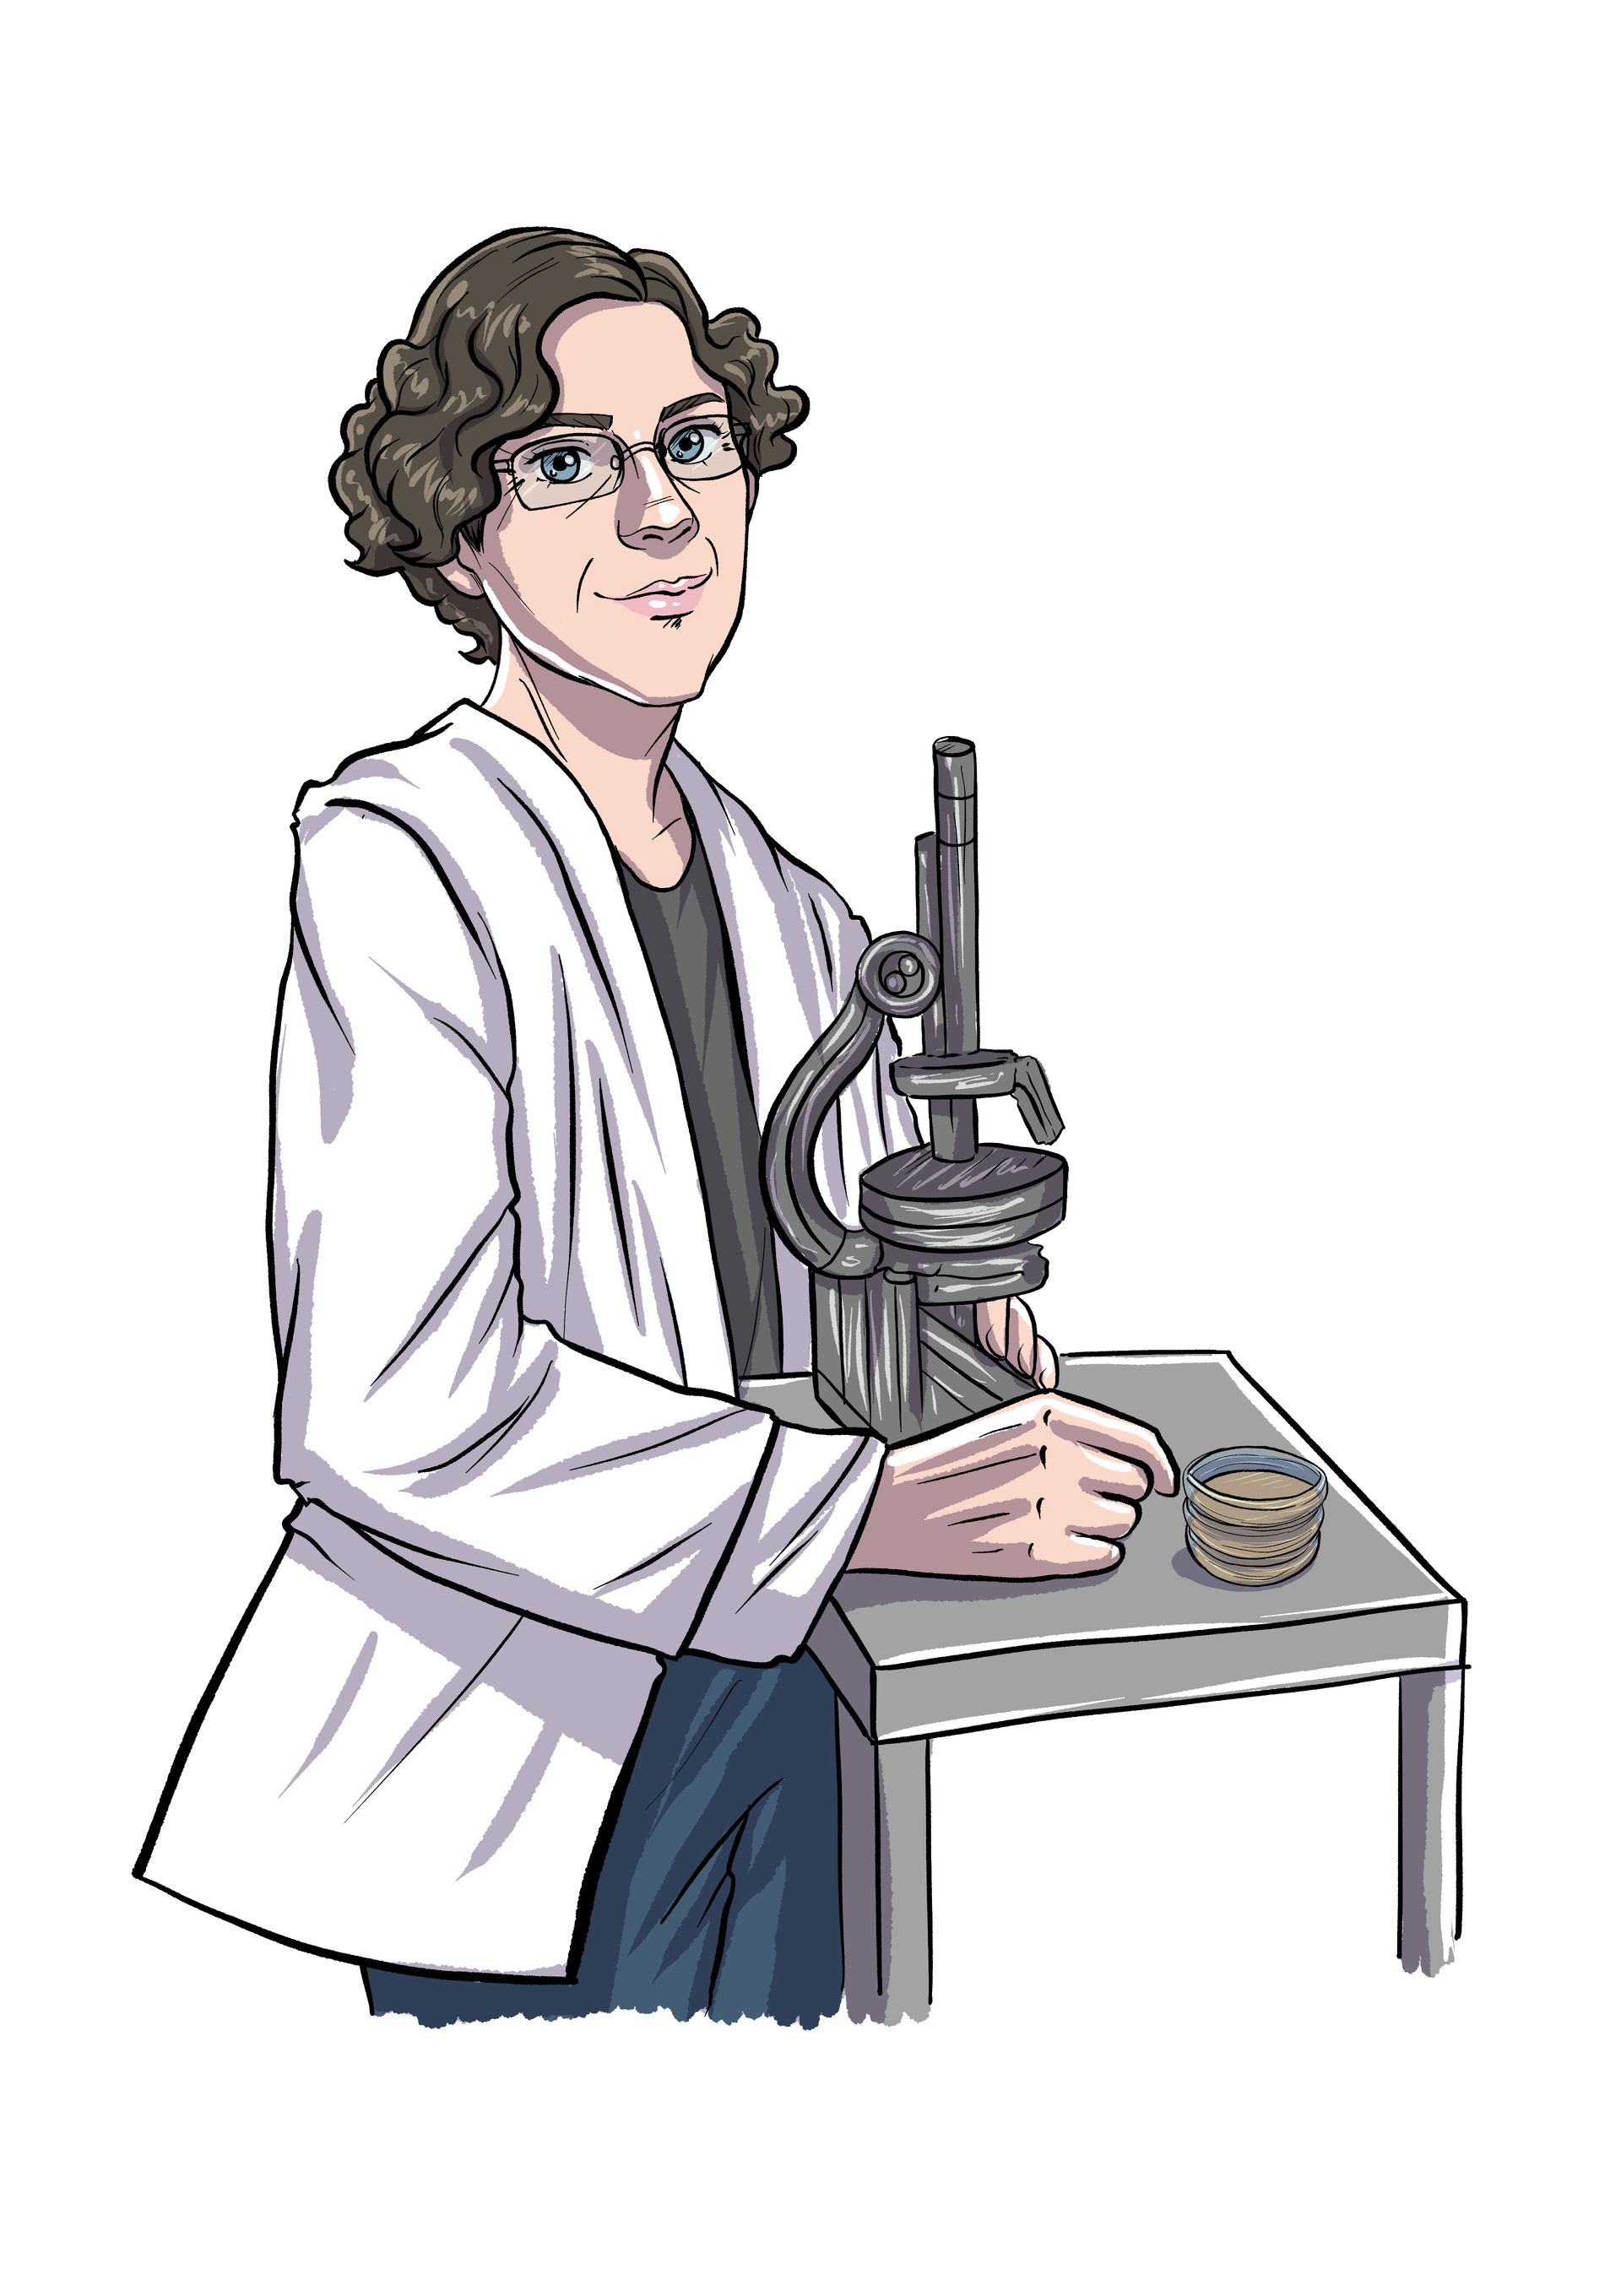 Cartoon image of Dr. Anna Wessels Willaims standing next to a table while holding a microscope, wearing a lab coat over her clothes and eye glasses on her face.